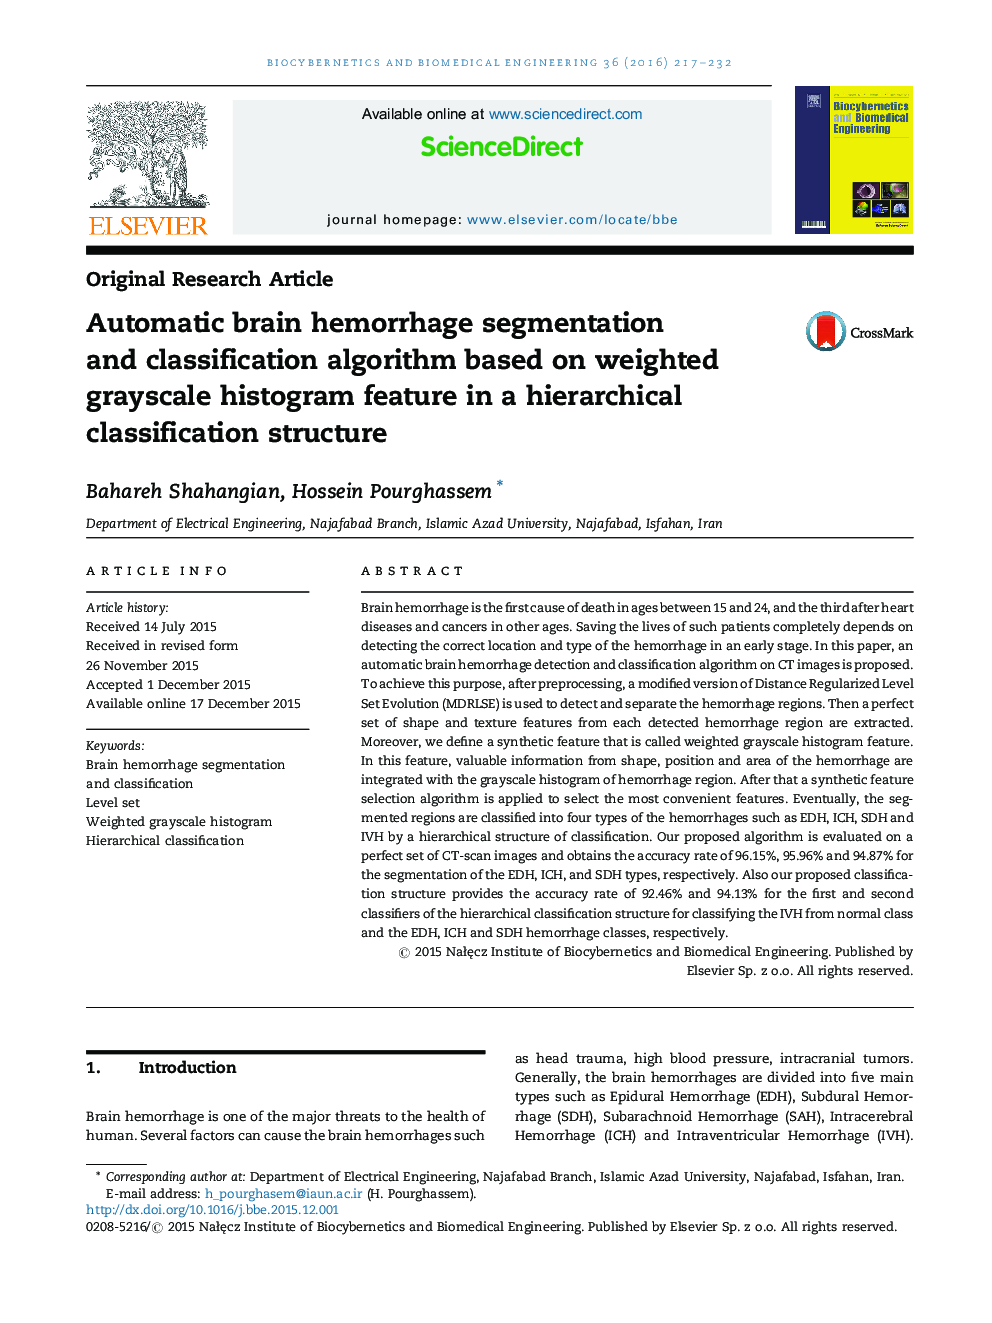 Automatic brain hemorrhage segmentation and classification algorithm based on weighted grayscale histogram feature in a hierarchical classification structure